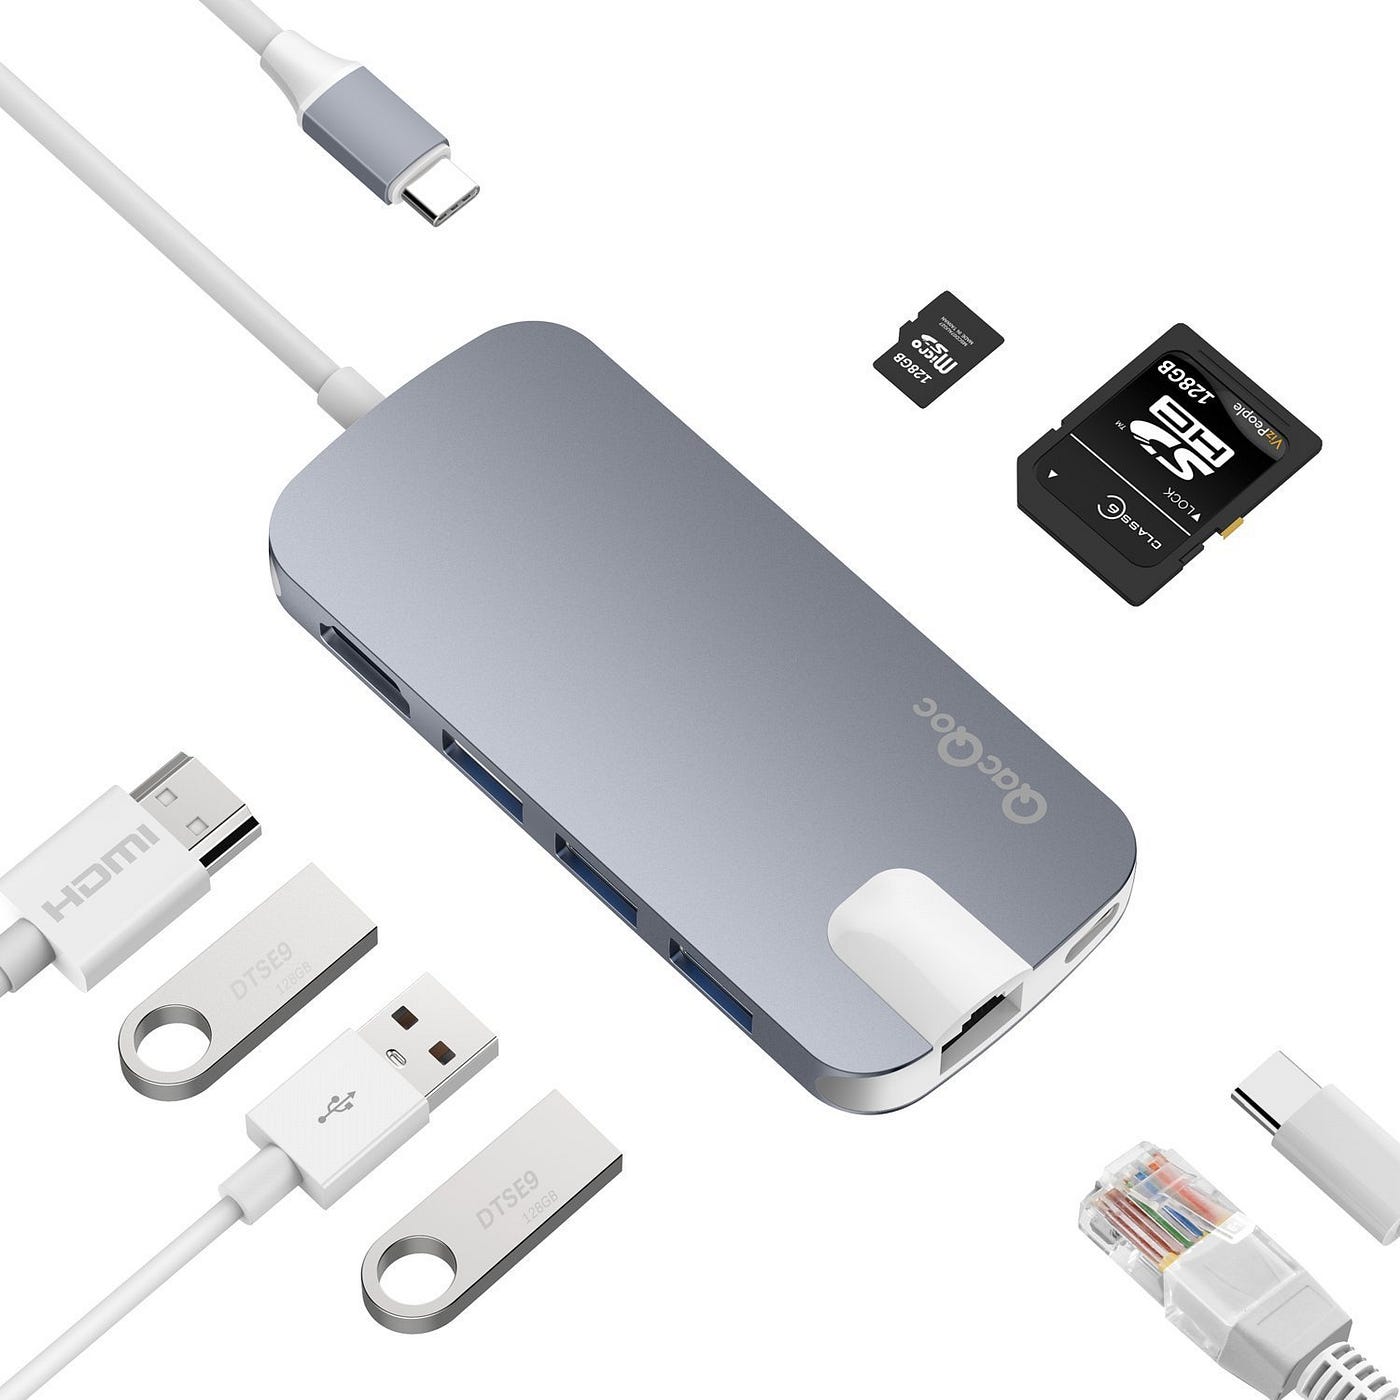 USB 3.0, USB 3.1, USB Type C: This is behind the names | by Robert Graham |  Medium